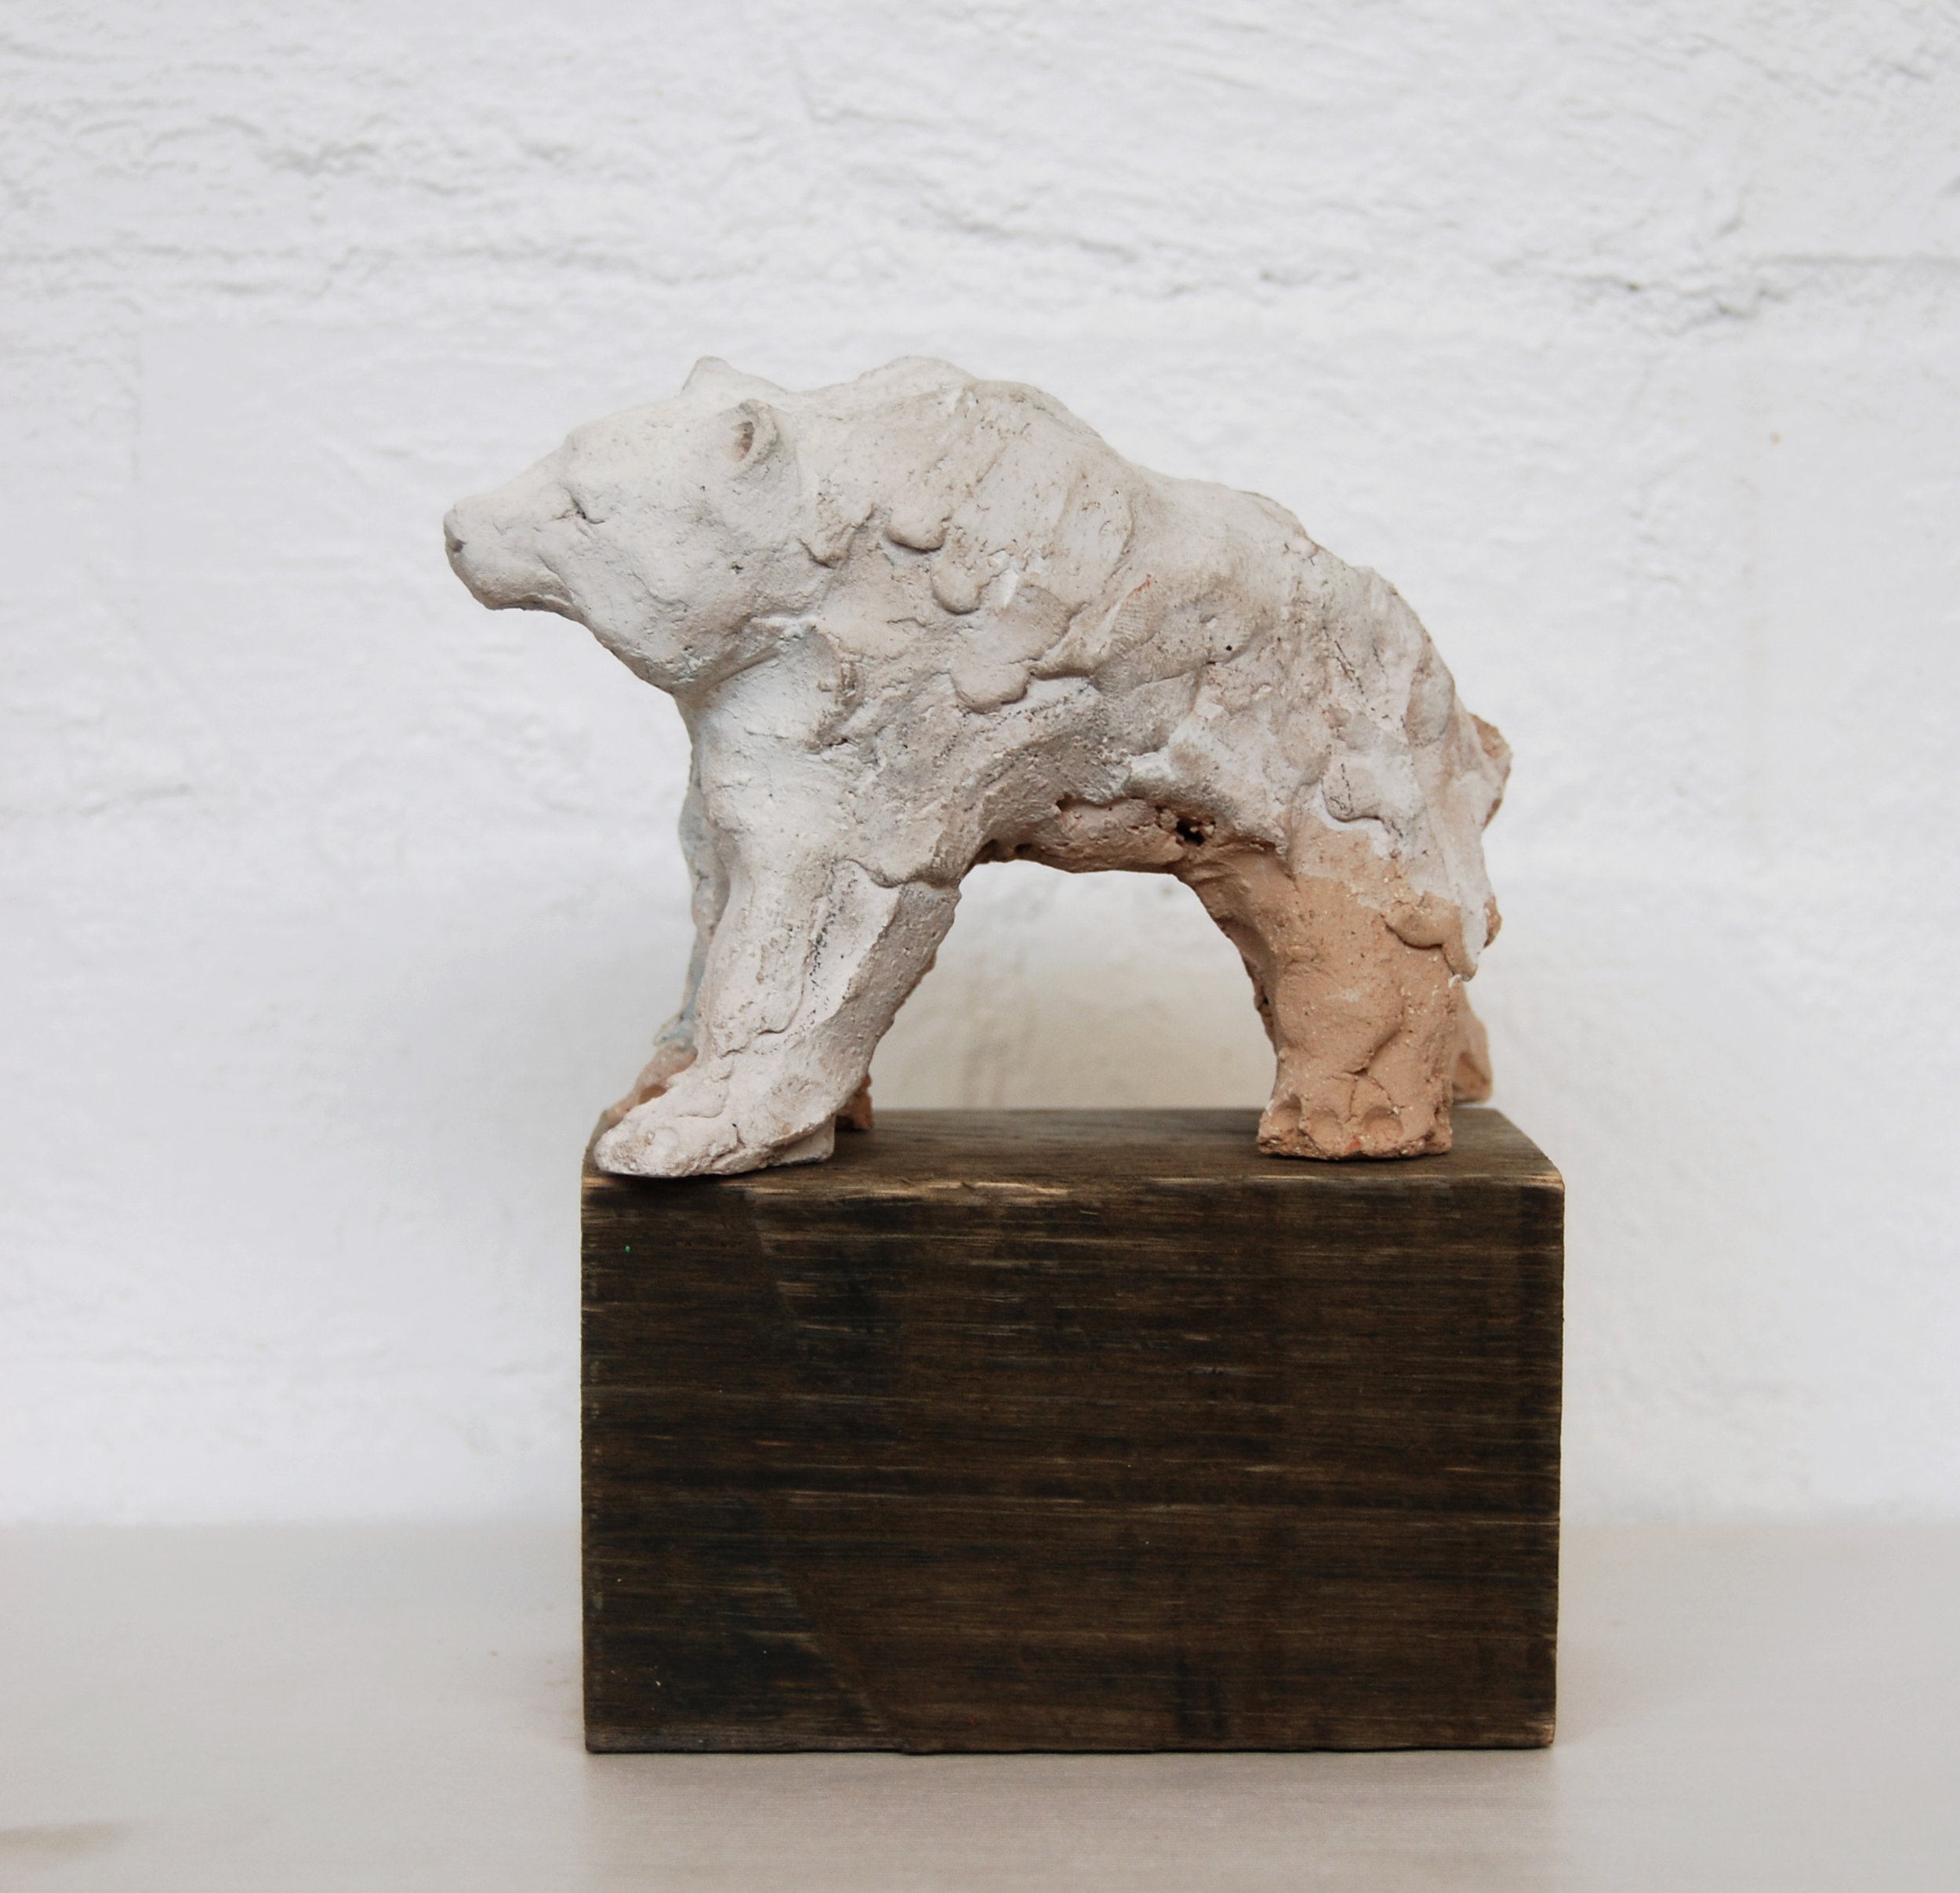  Justin Williams,&nbsp; I saw something white in the forest , 2014, stoneware and raw pigments, 12 x 38 x 12cm 